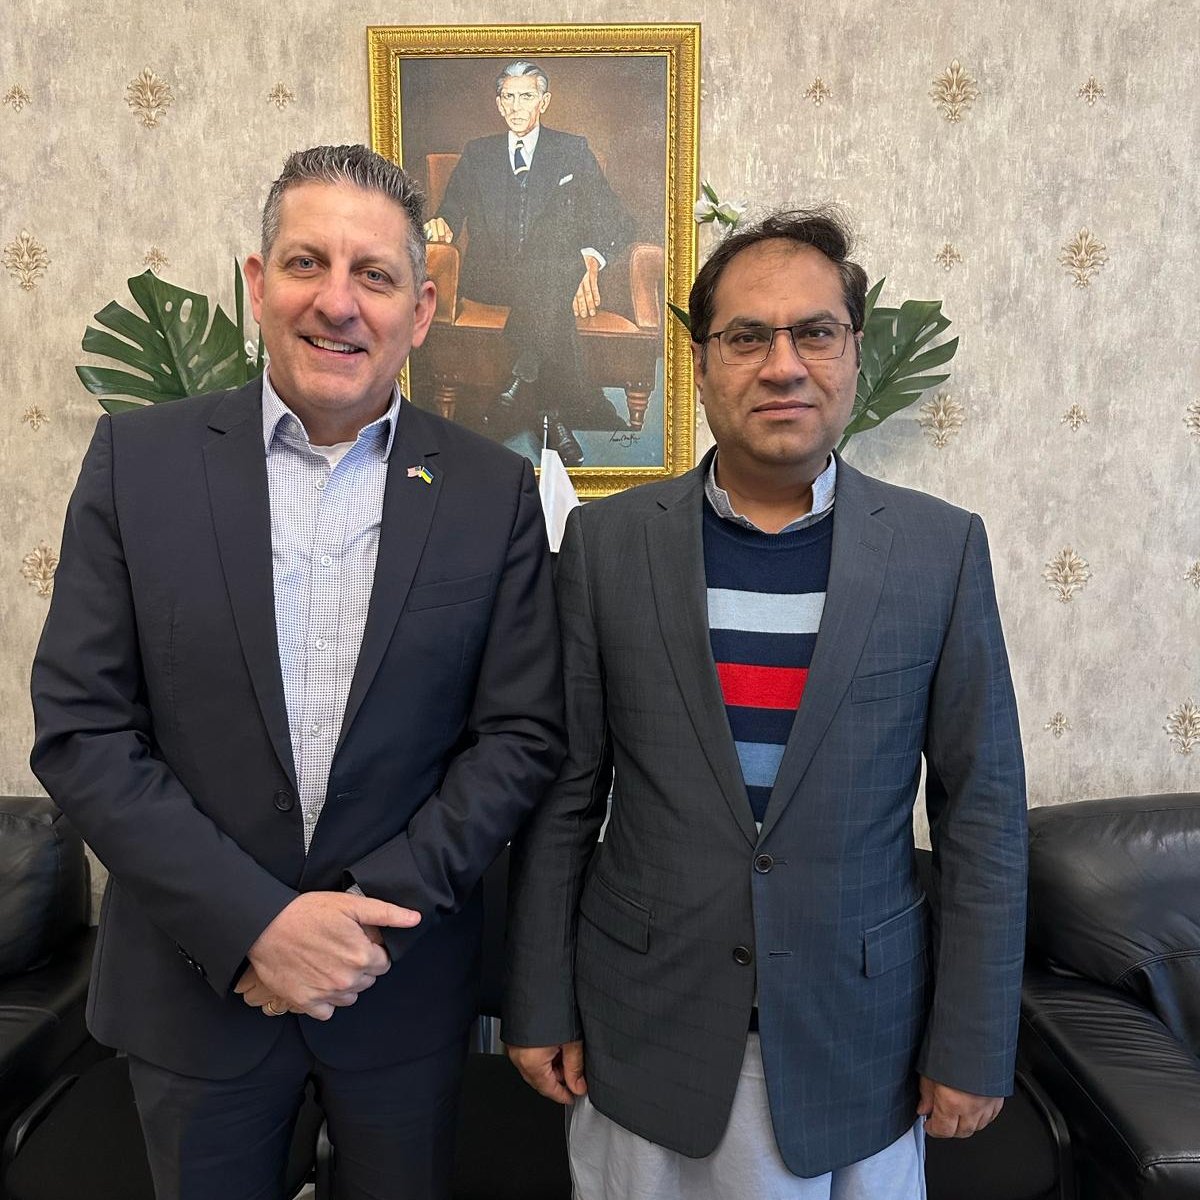 CG, Summar Javed was pleased to receive Mr. Jack Hillmeyer, CG of the U.S. today. The two CGs discussed issues of mutual interest for the Pakistani and American diaspora in Scotland. Mr. Hillmeyer shared his experience working in Karachi as a Deputy Consul General.